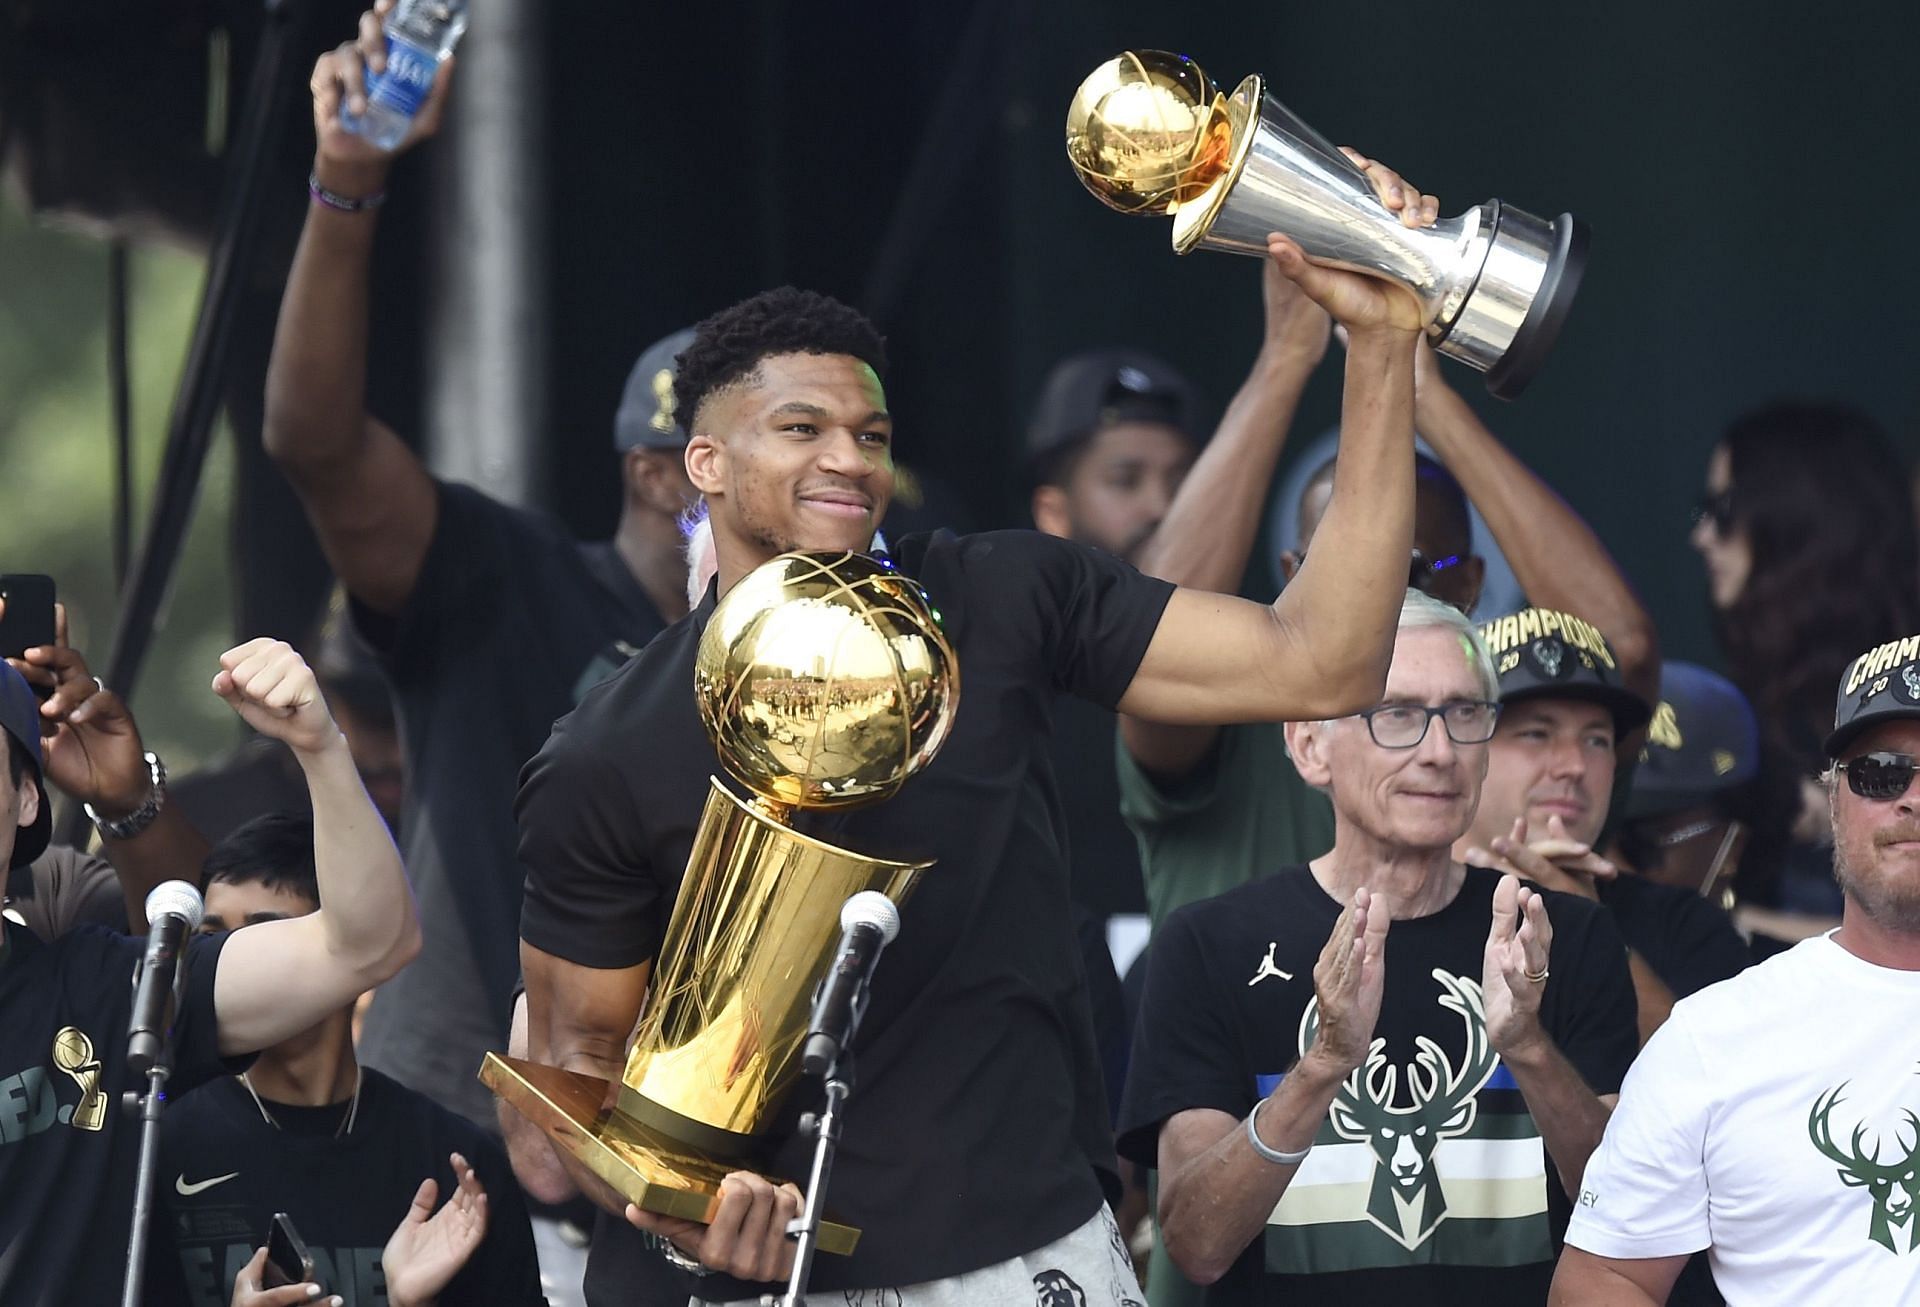 Kostas won a ring before his big brother Giannis